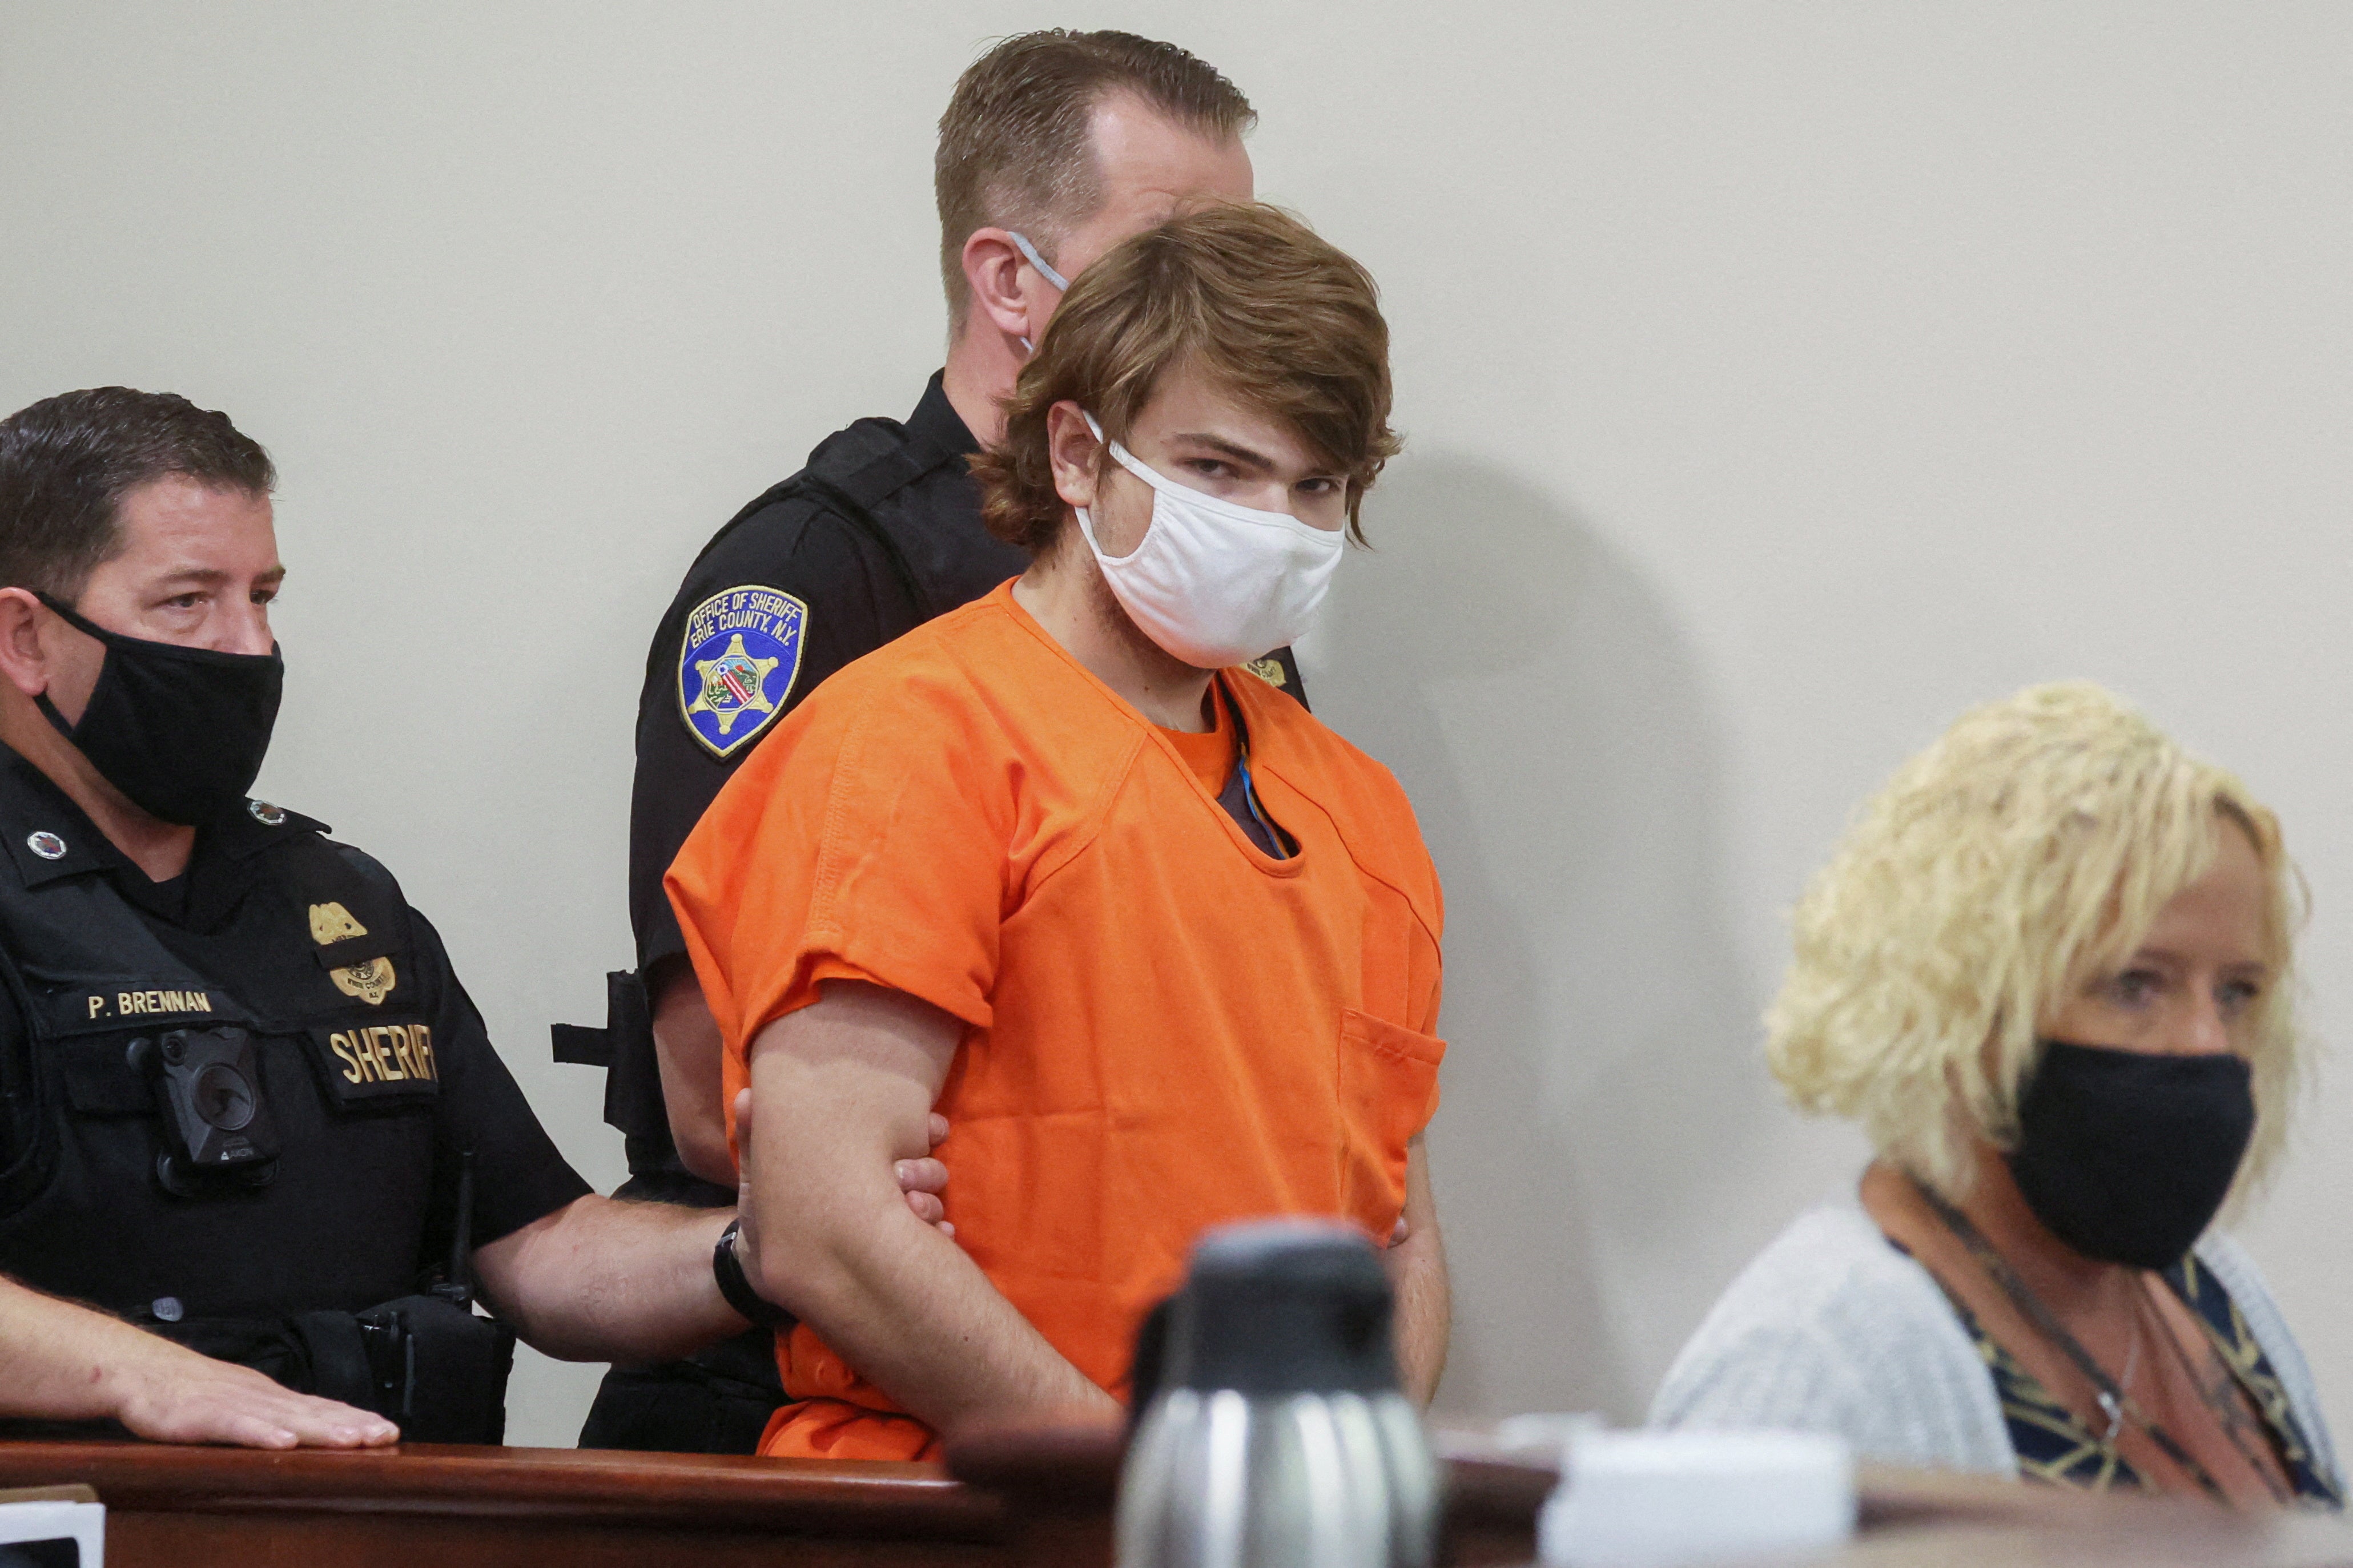 Payton Gendron appears in court on 19 May where he was indicted by a grand jury over the mass shooting